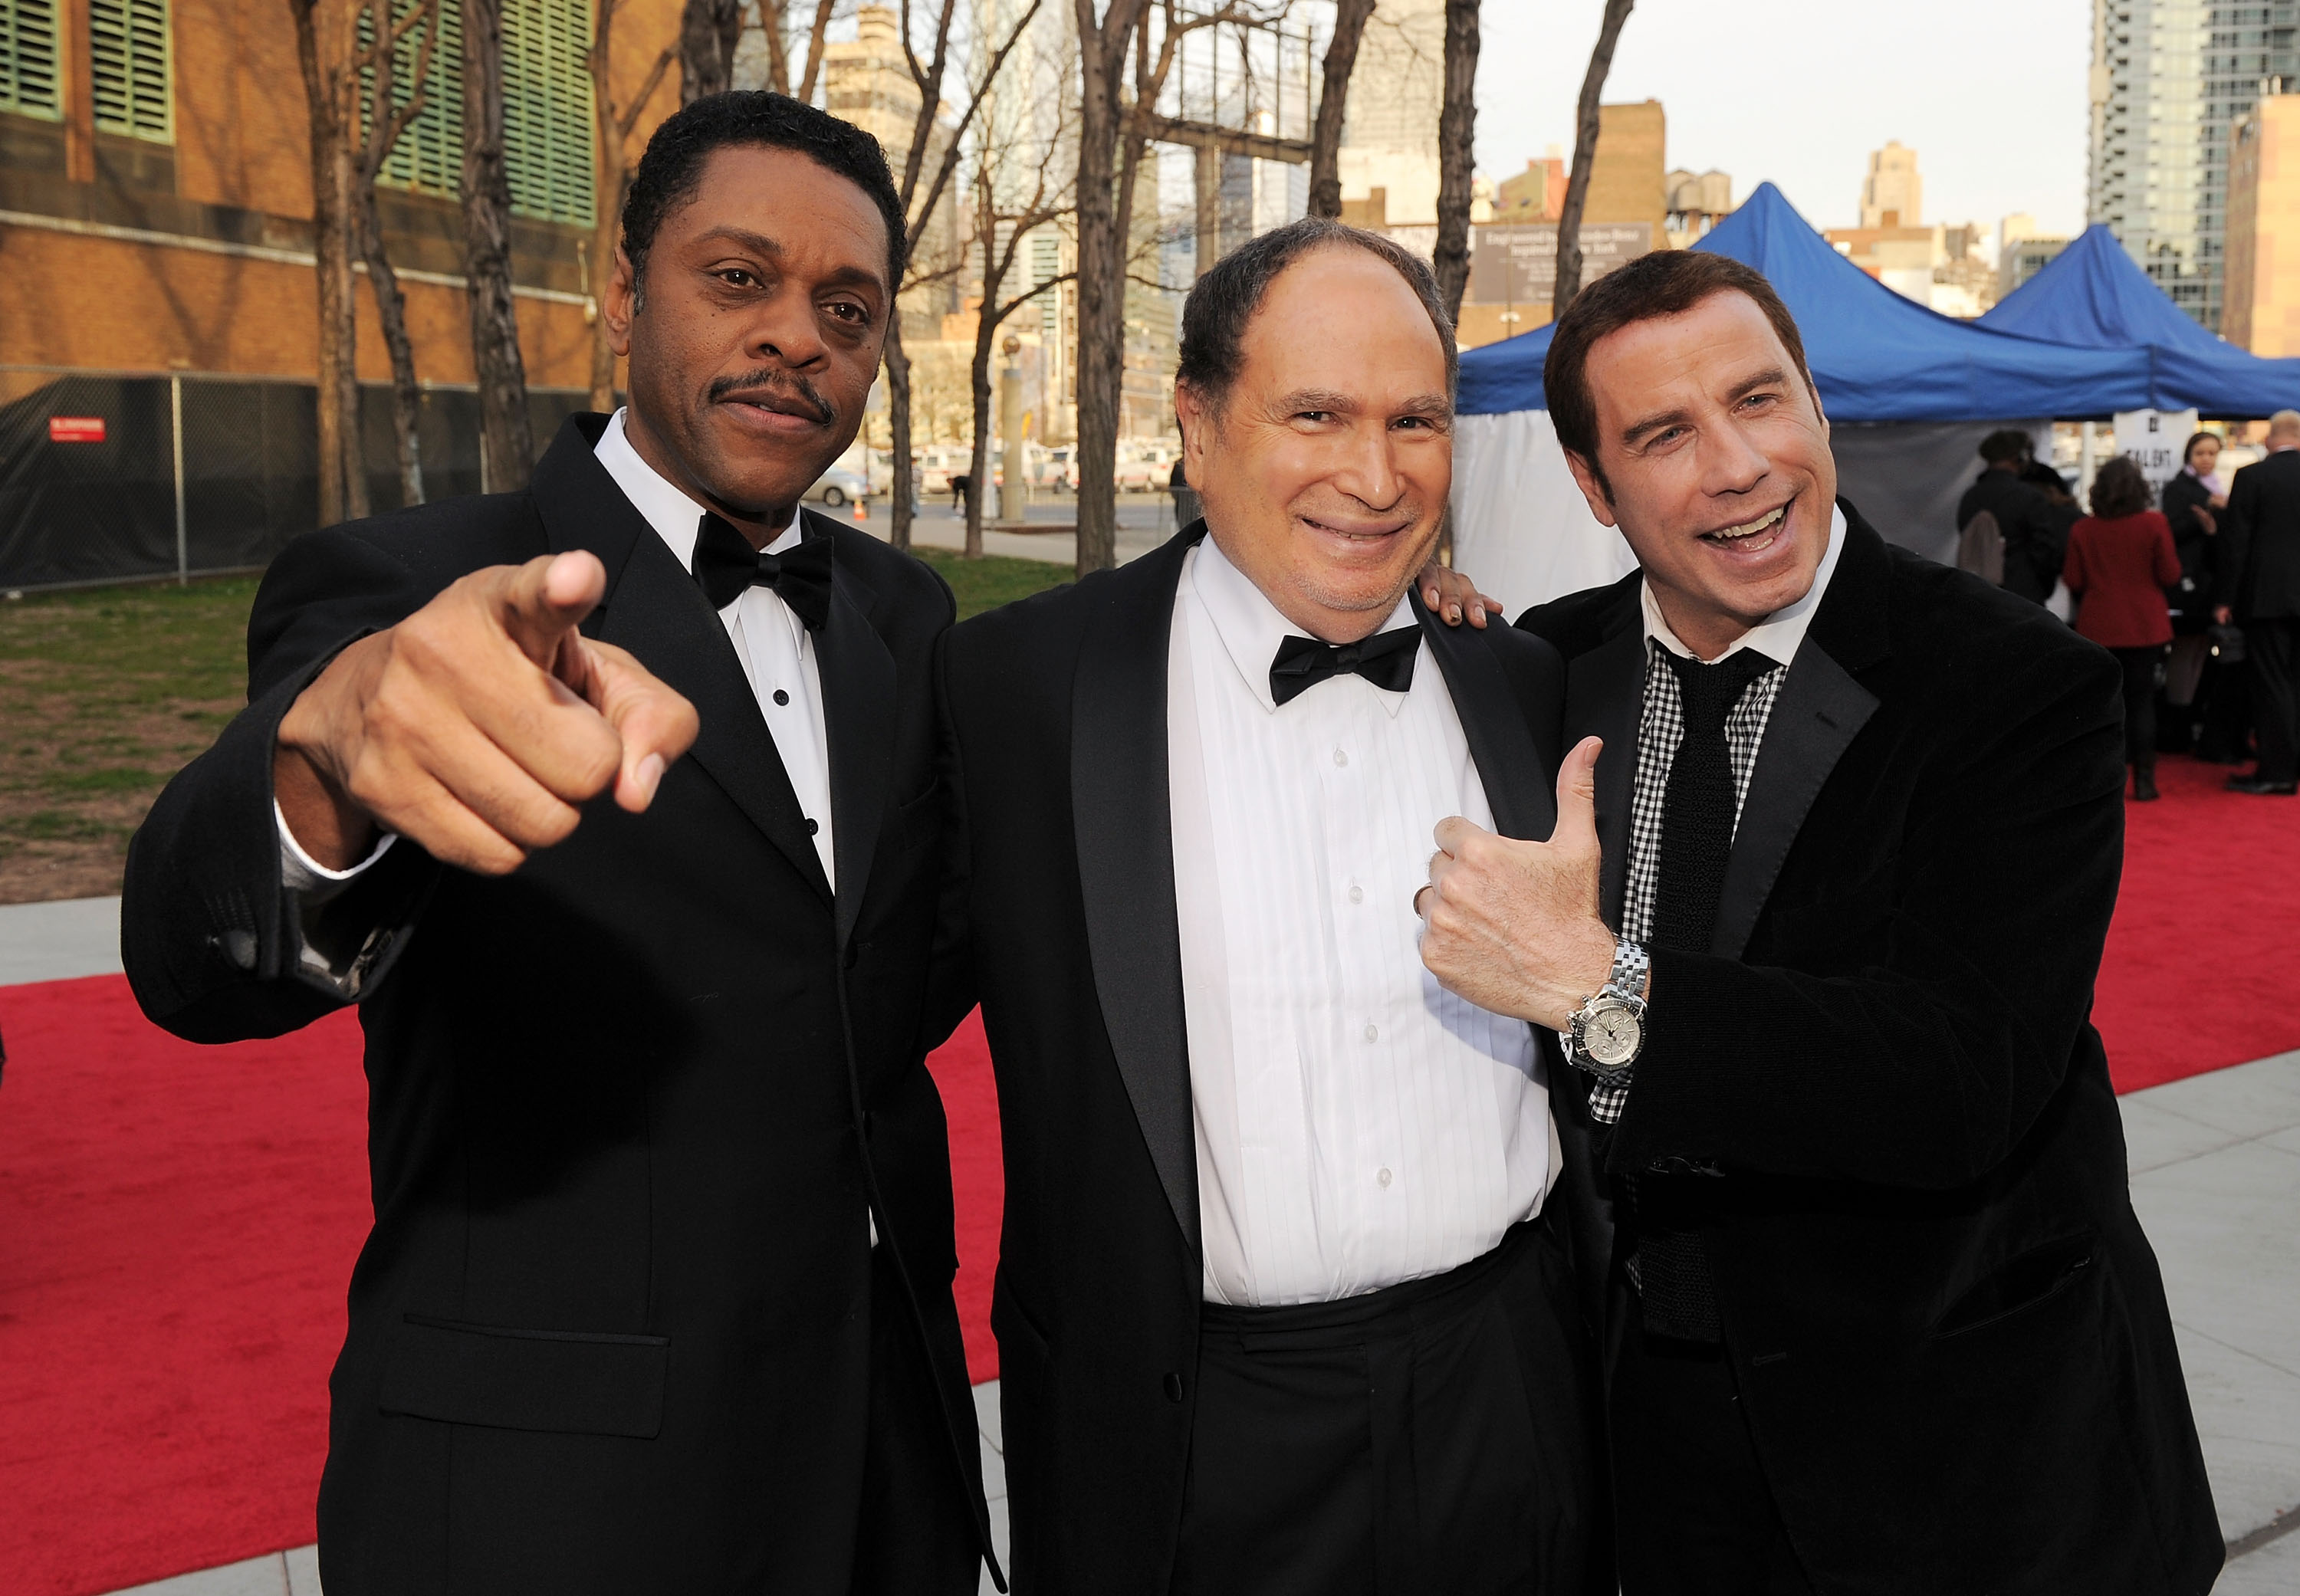 Lawrence Hilton-Jacobs, Gabe Kaplan, and John Travolta in New York City on April 10, 2011 | Source: Getty Images